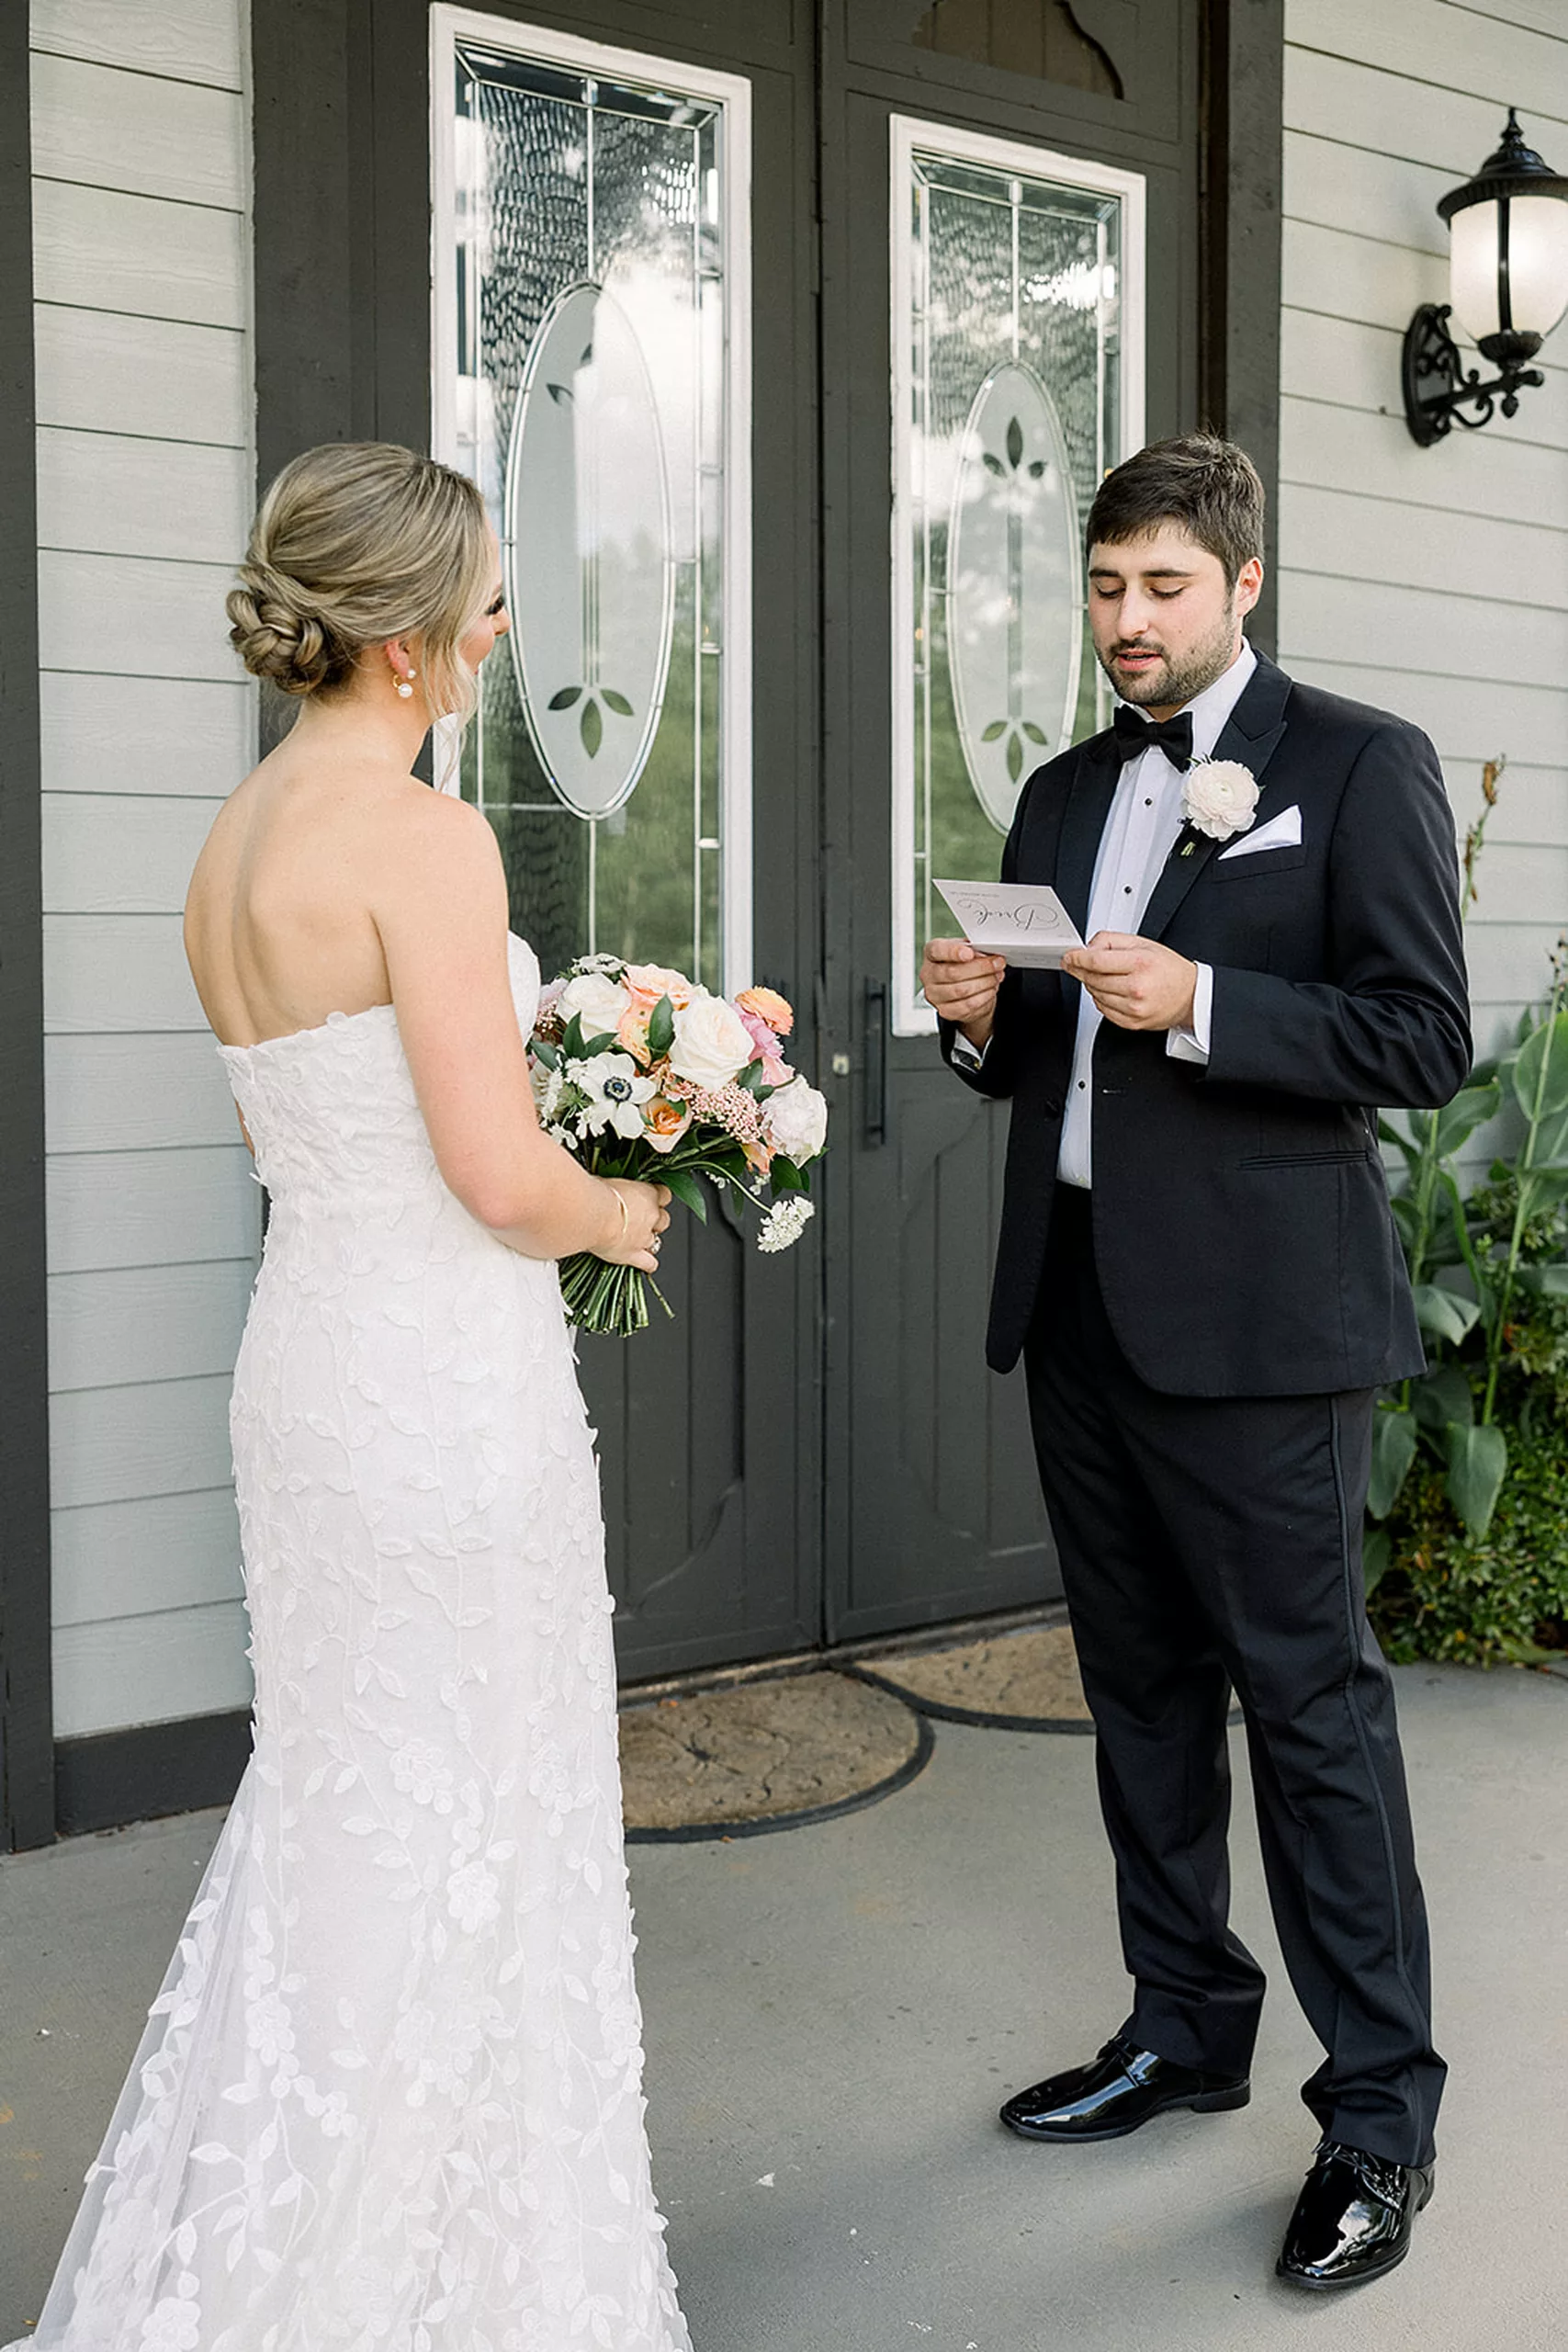 A groom in a black suit reads a letter with his bride while standing on a porch